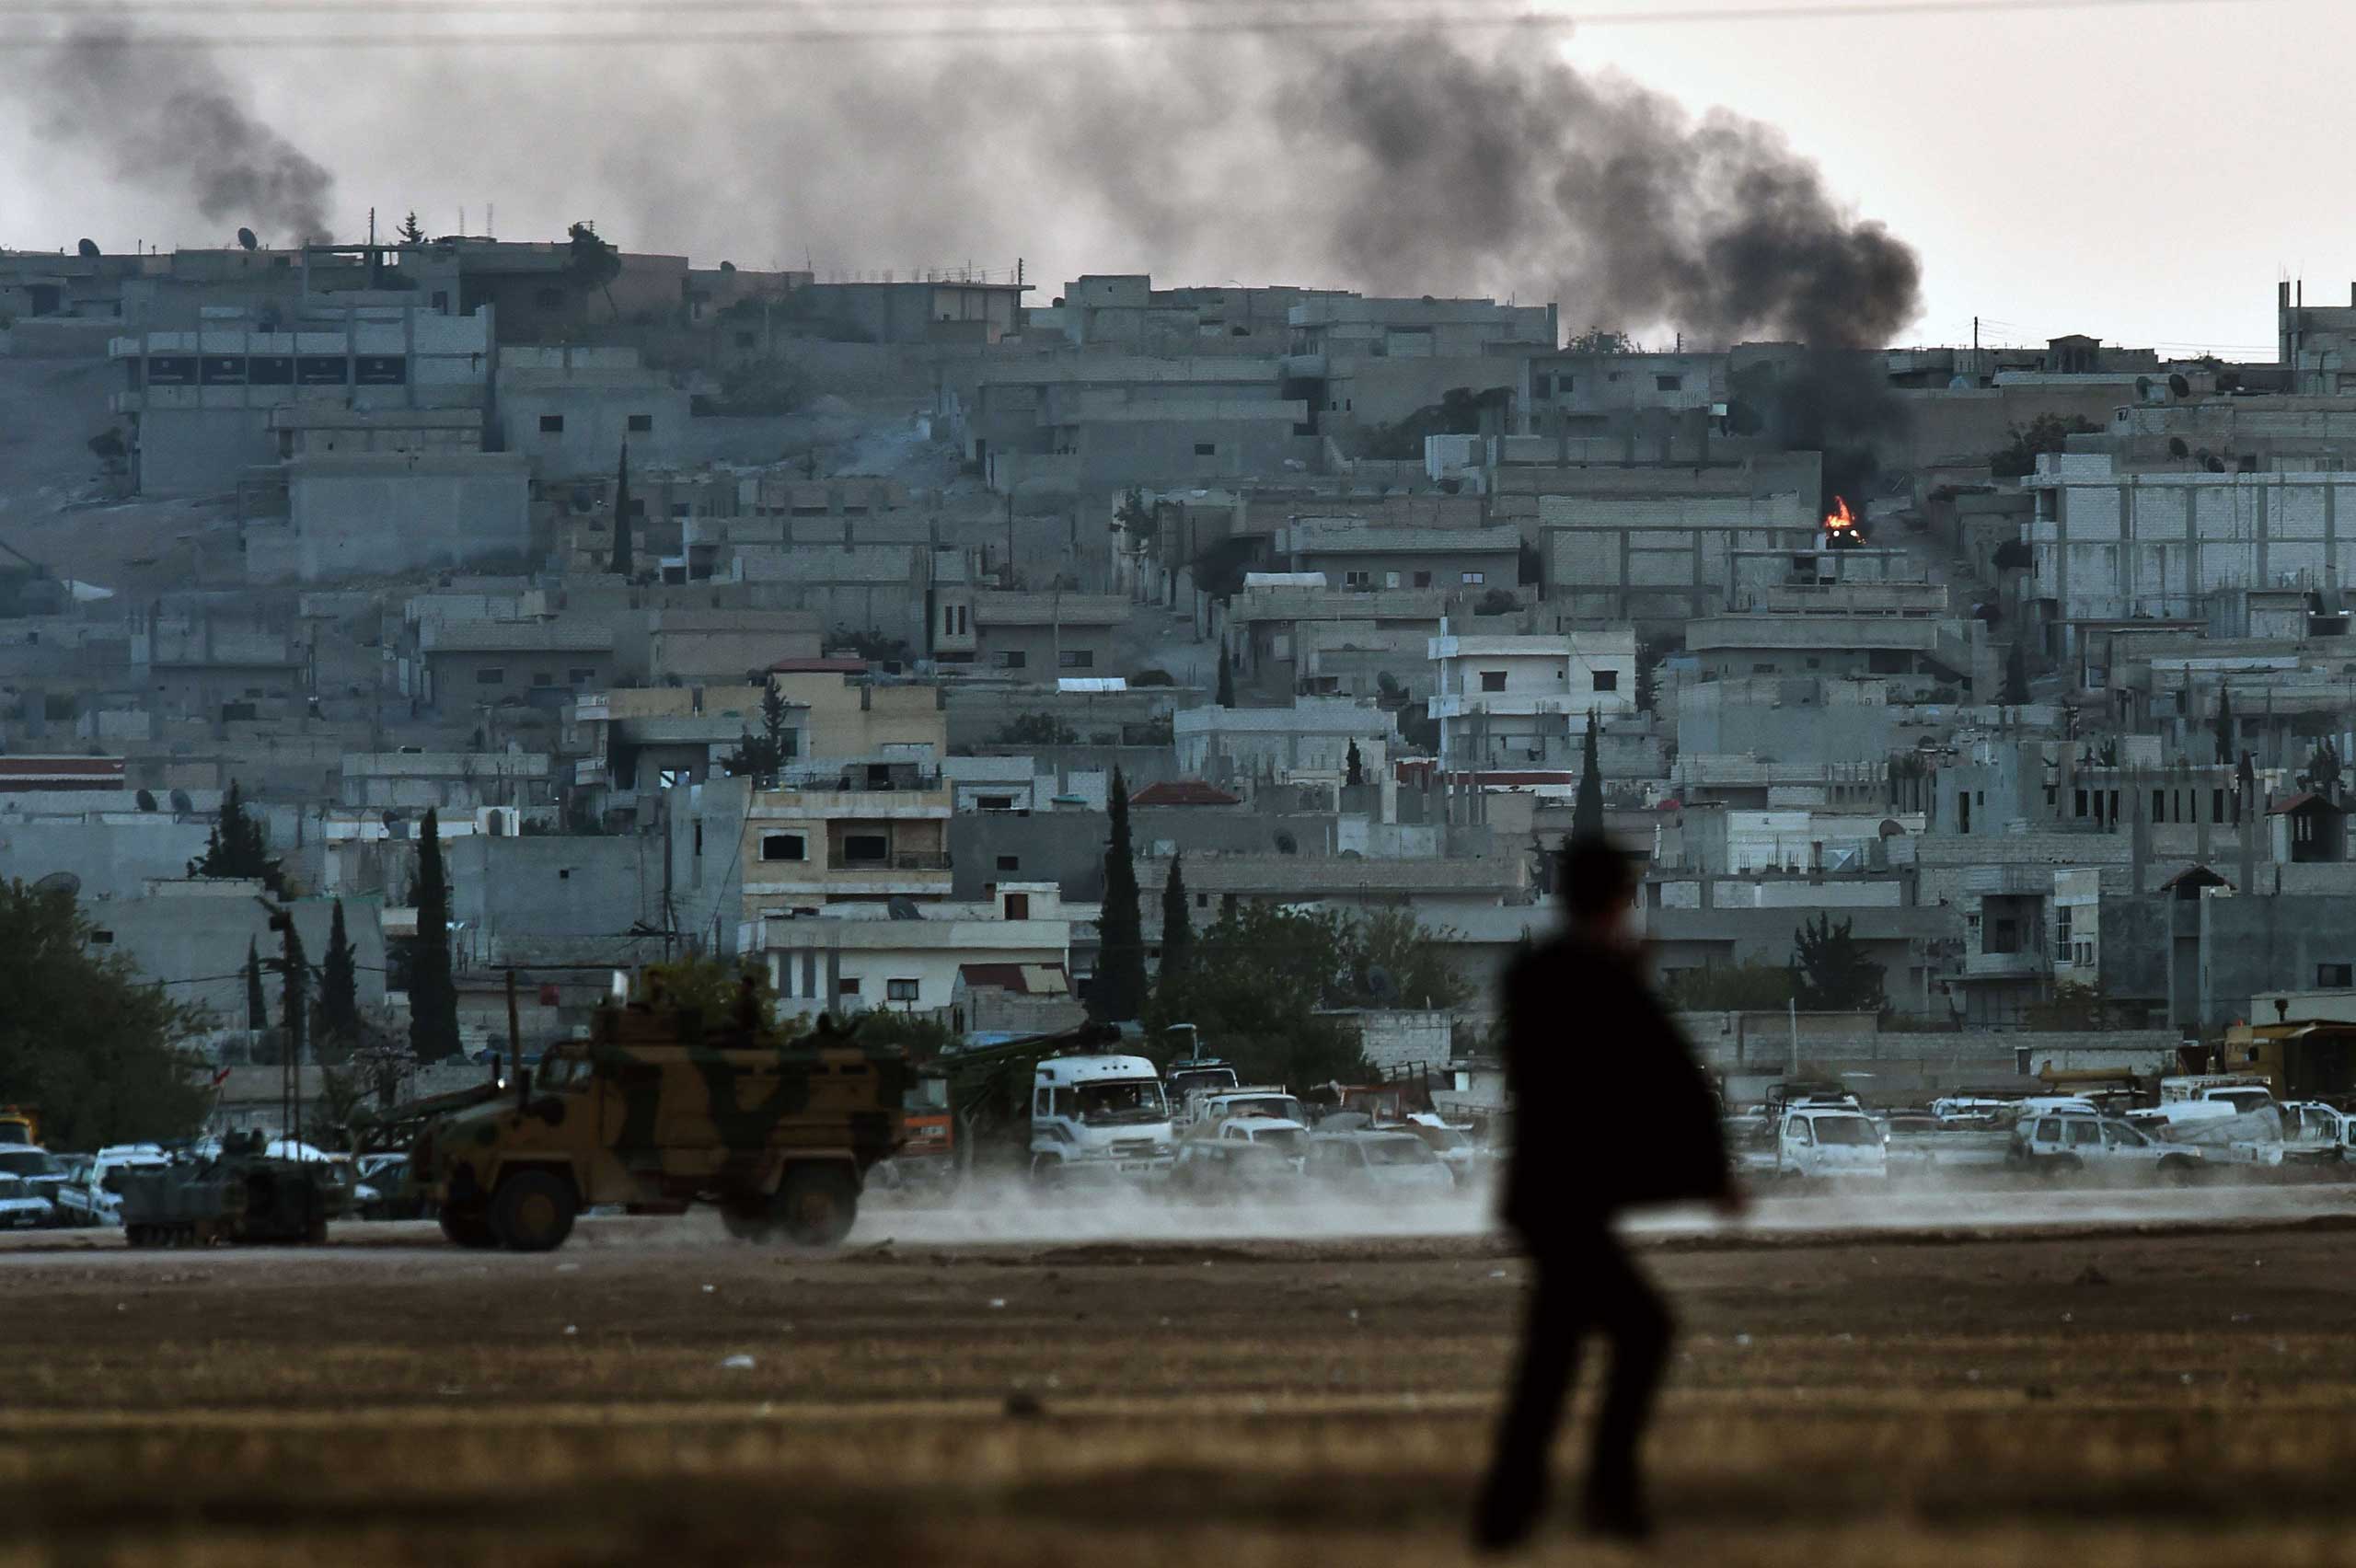 Smoke rises from the city centre of the Syrian town of Ain al-Arab, known as Kobani by the Kurds, as seen from the Turkish-Syrian border during heavy fighting, in the southeastern town of Suruc, Sanliurfa province, Turkey, on Oct. 7, 2014. (Aris Messinis—AFP/Getty Images)